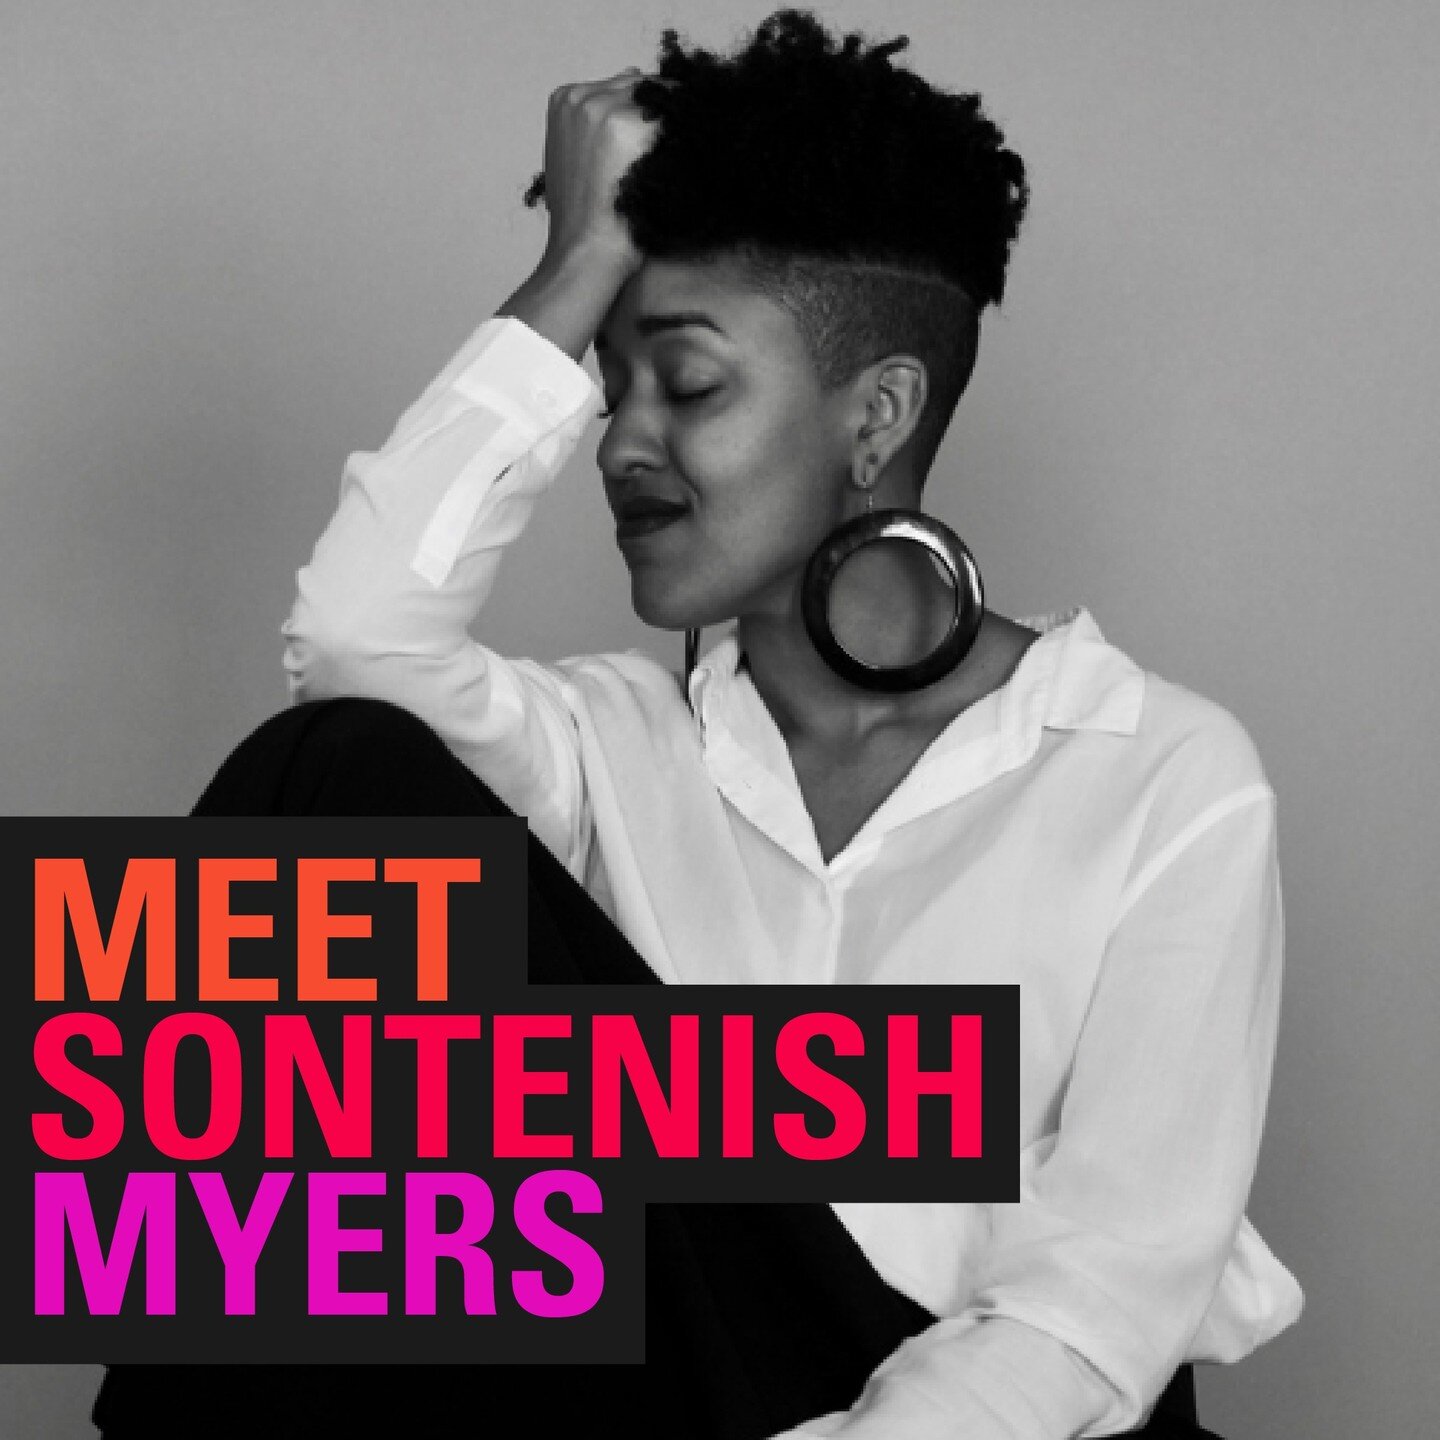 Award-Winning Director Sontenish Myers Joins Great Guns USA!

A Jamaican-American writer-director, Sontenish graduated from NYU's Graduate Film Program where she is now an adjunct professor. Ranging across genres from drama to fantasy to dark comedy,